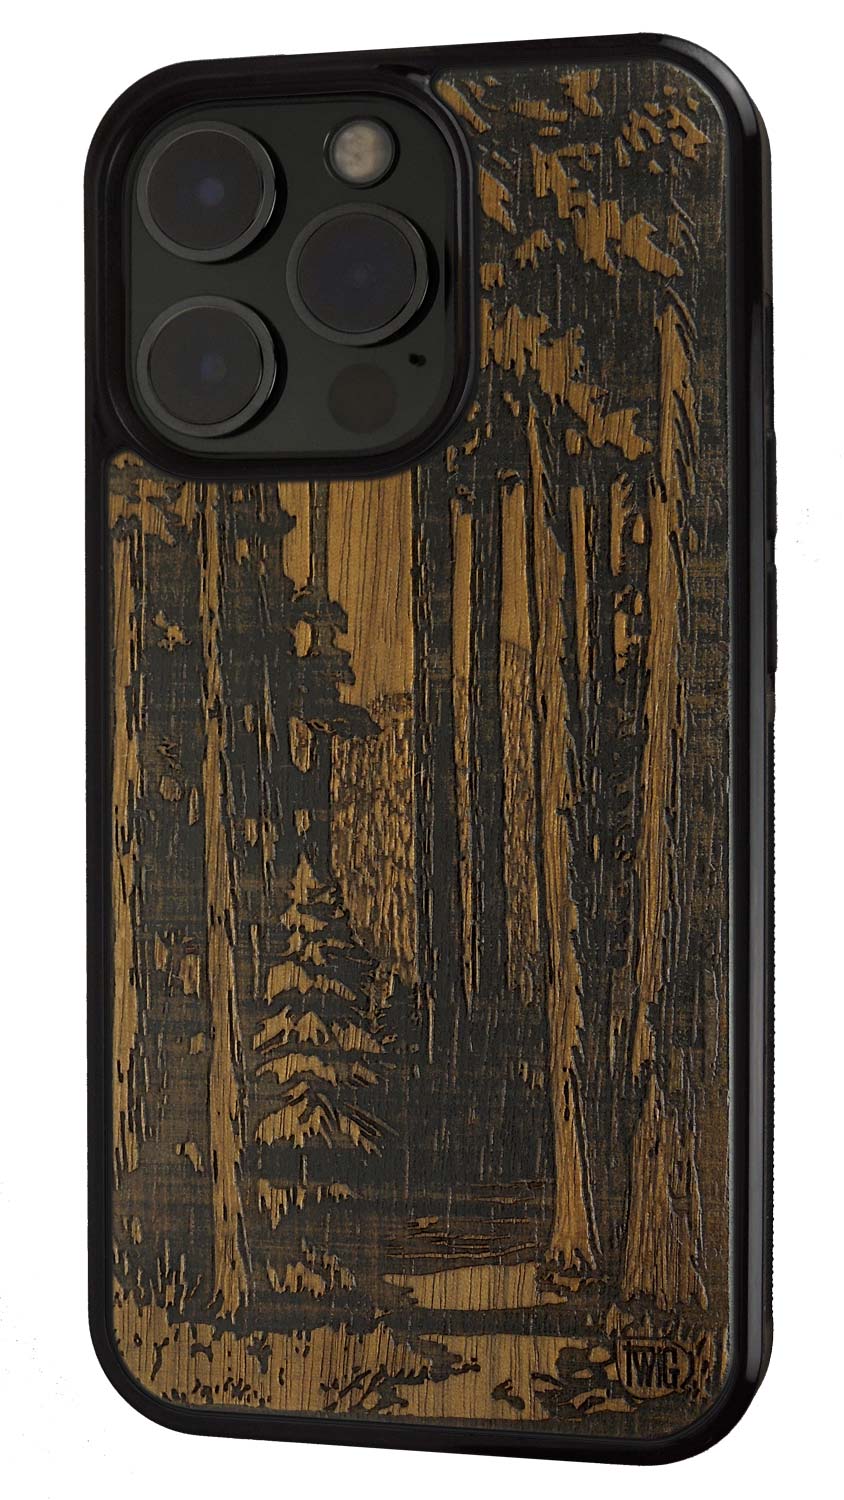 The Woods - Walnut iPhone Case, iPhone Case - Twig Case Co.